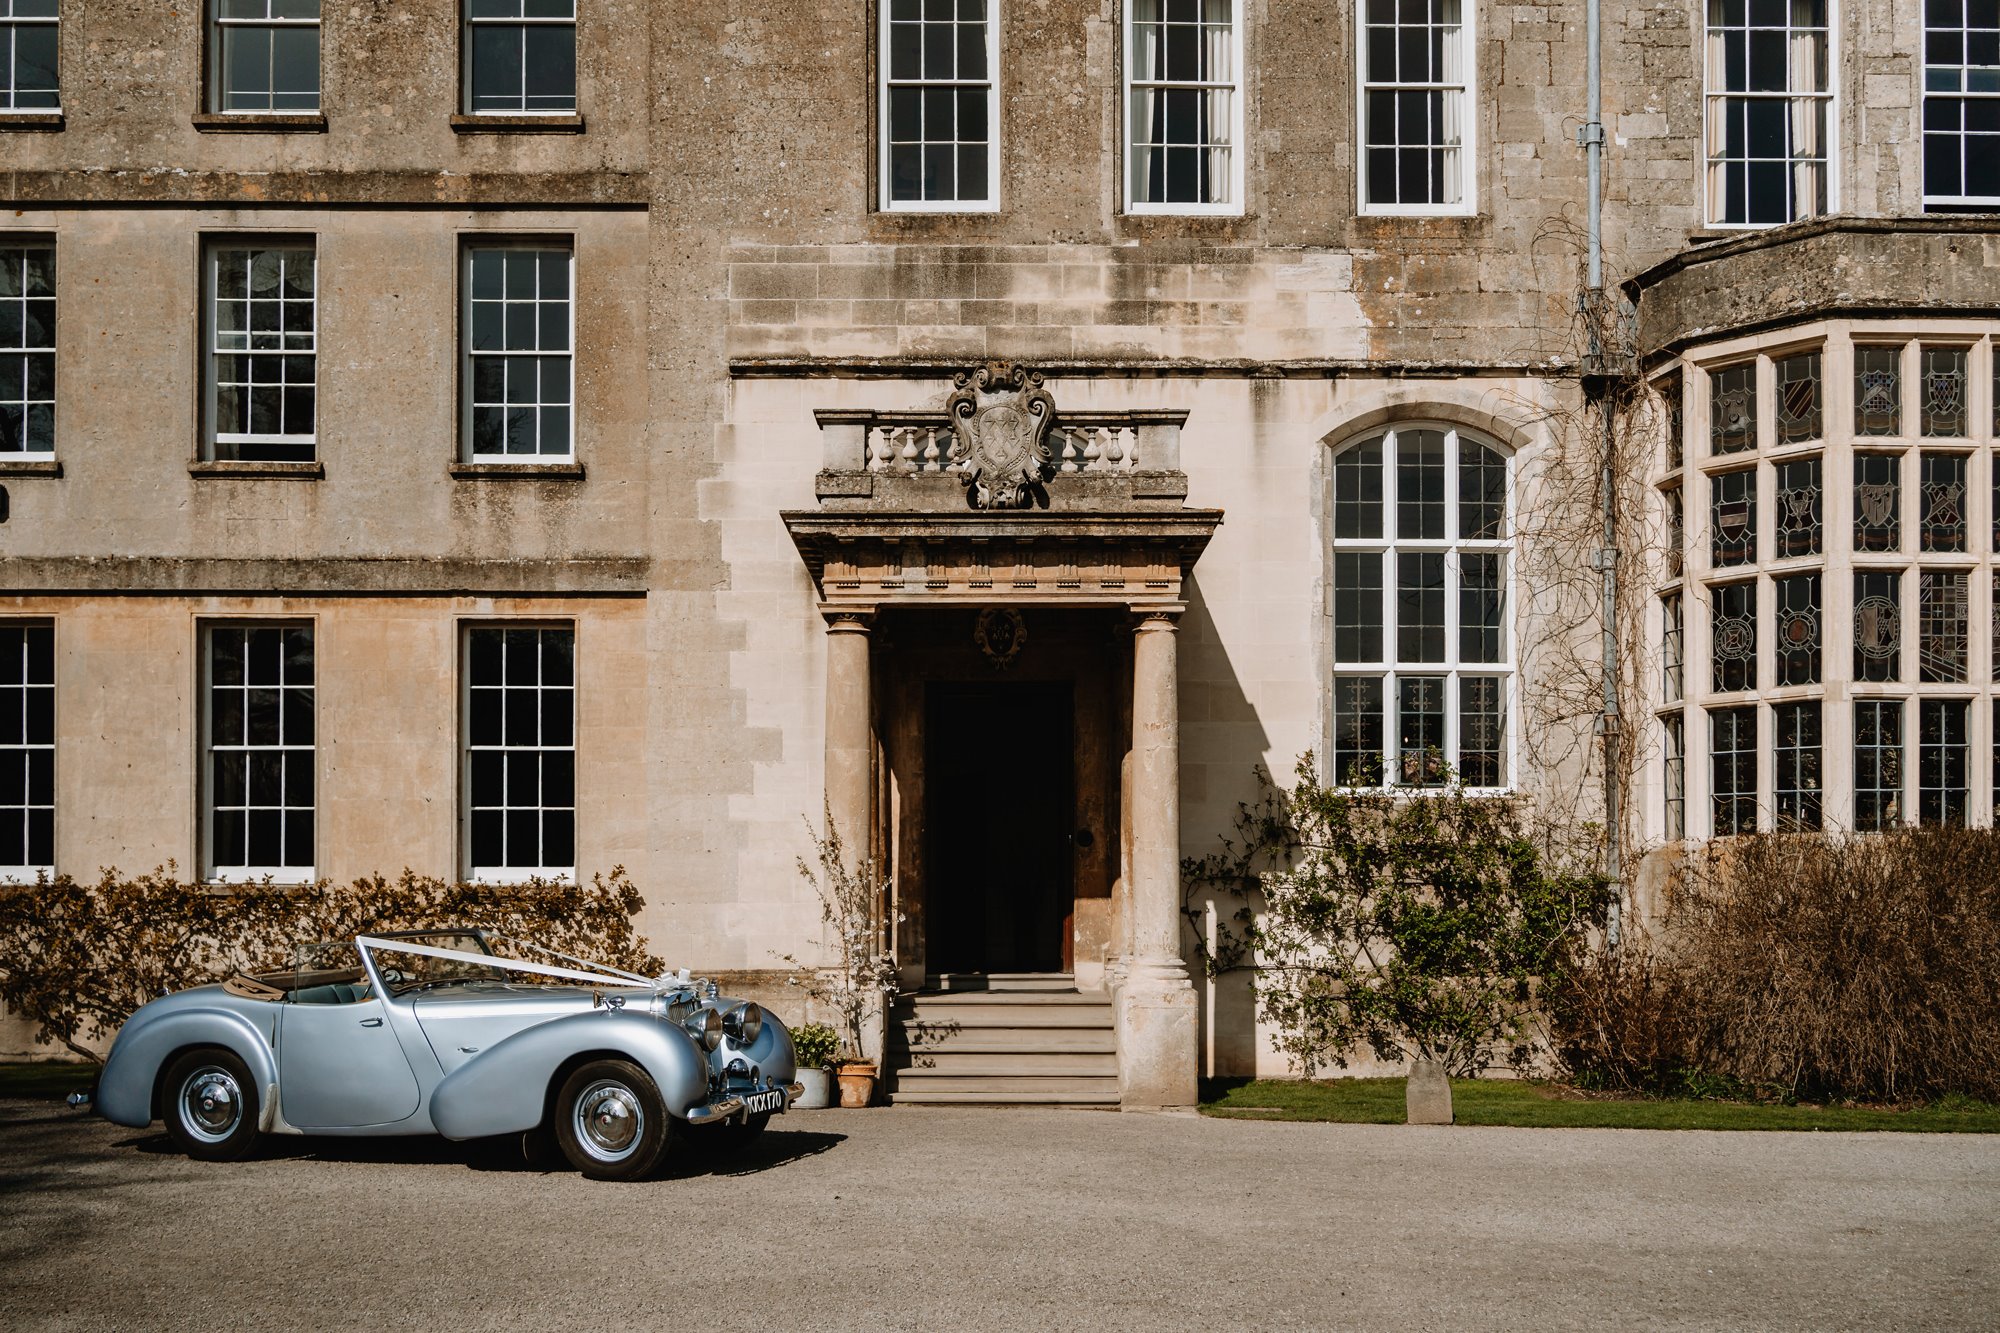 Classic car at Elmore Court, a stately home and wedding venue in the Cotswolds